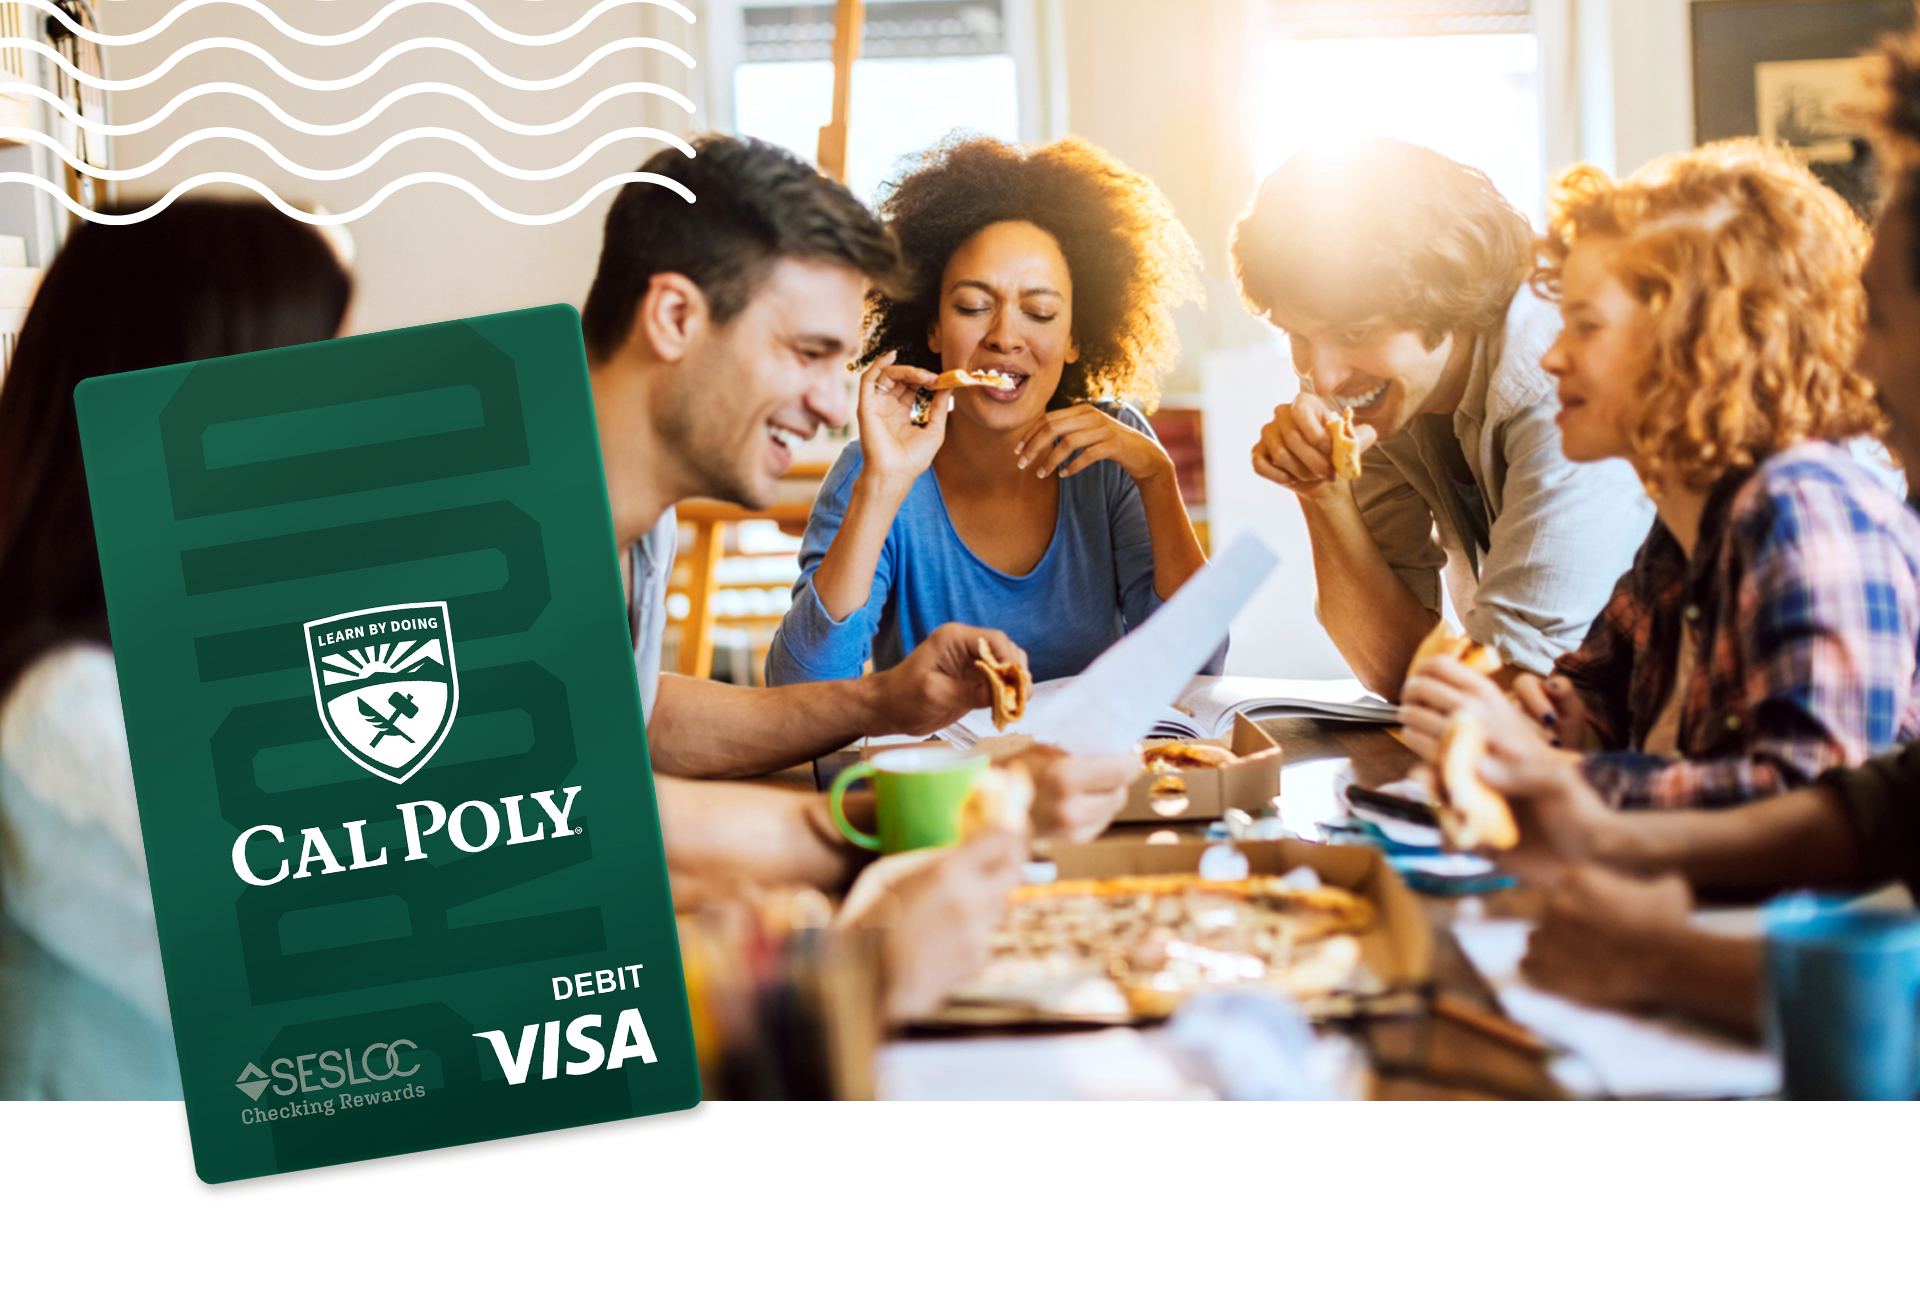 Cal Poly students enjoy pizza purchased with their SESLOC HomeFREE checking debit card.